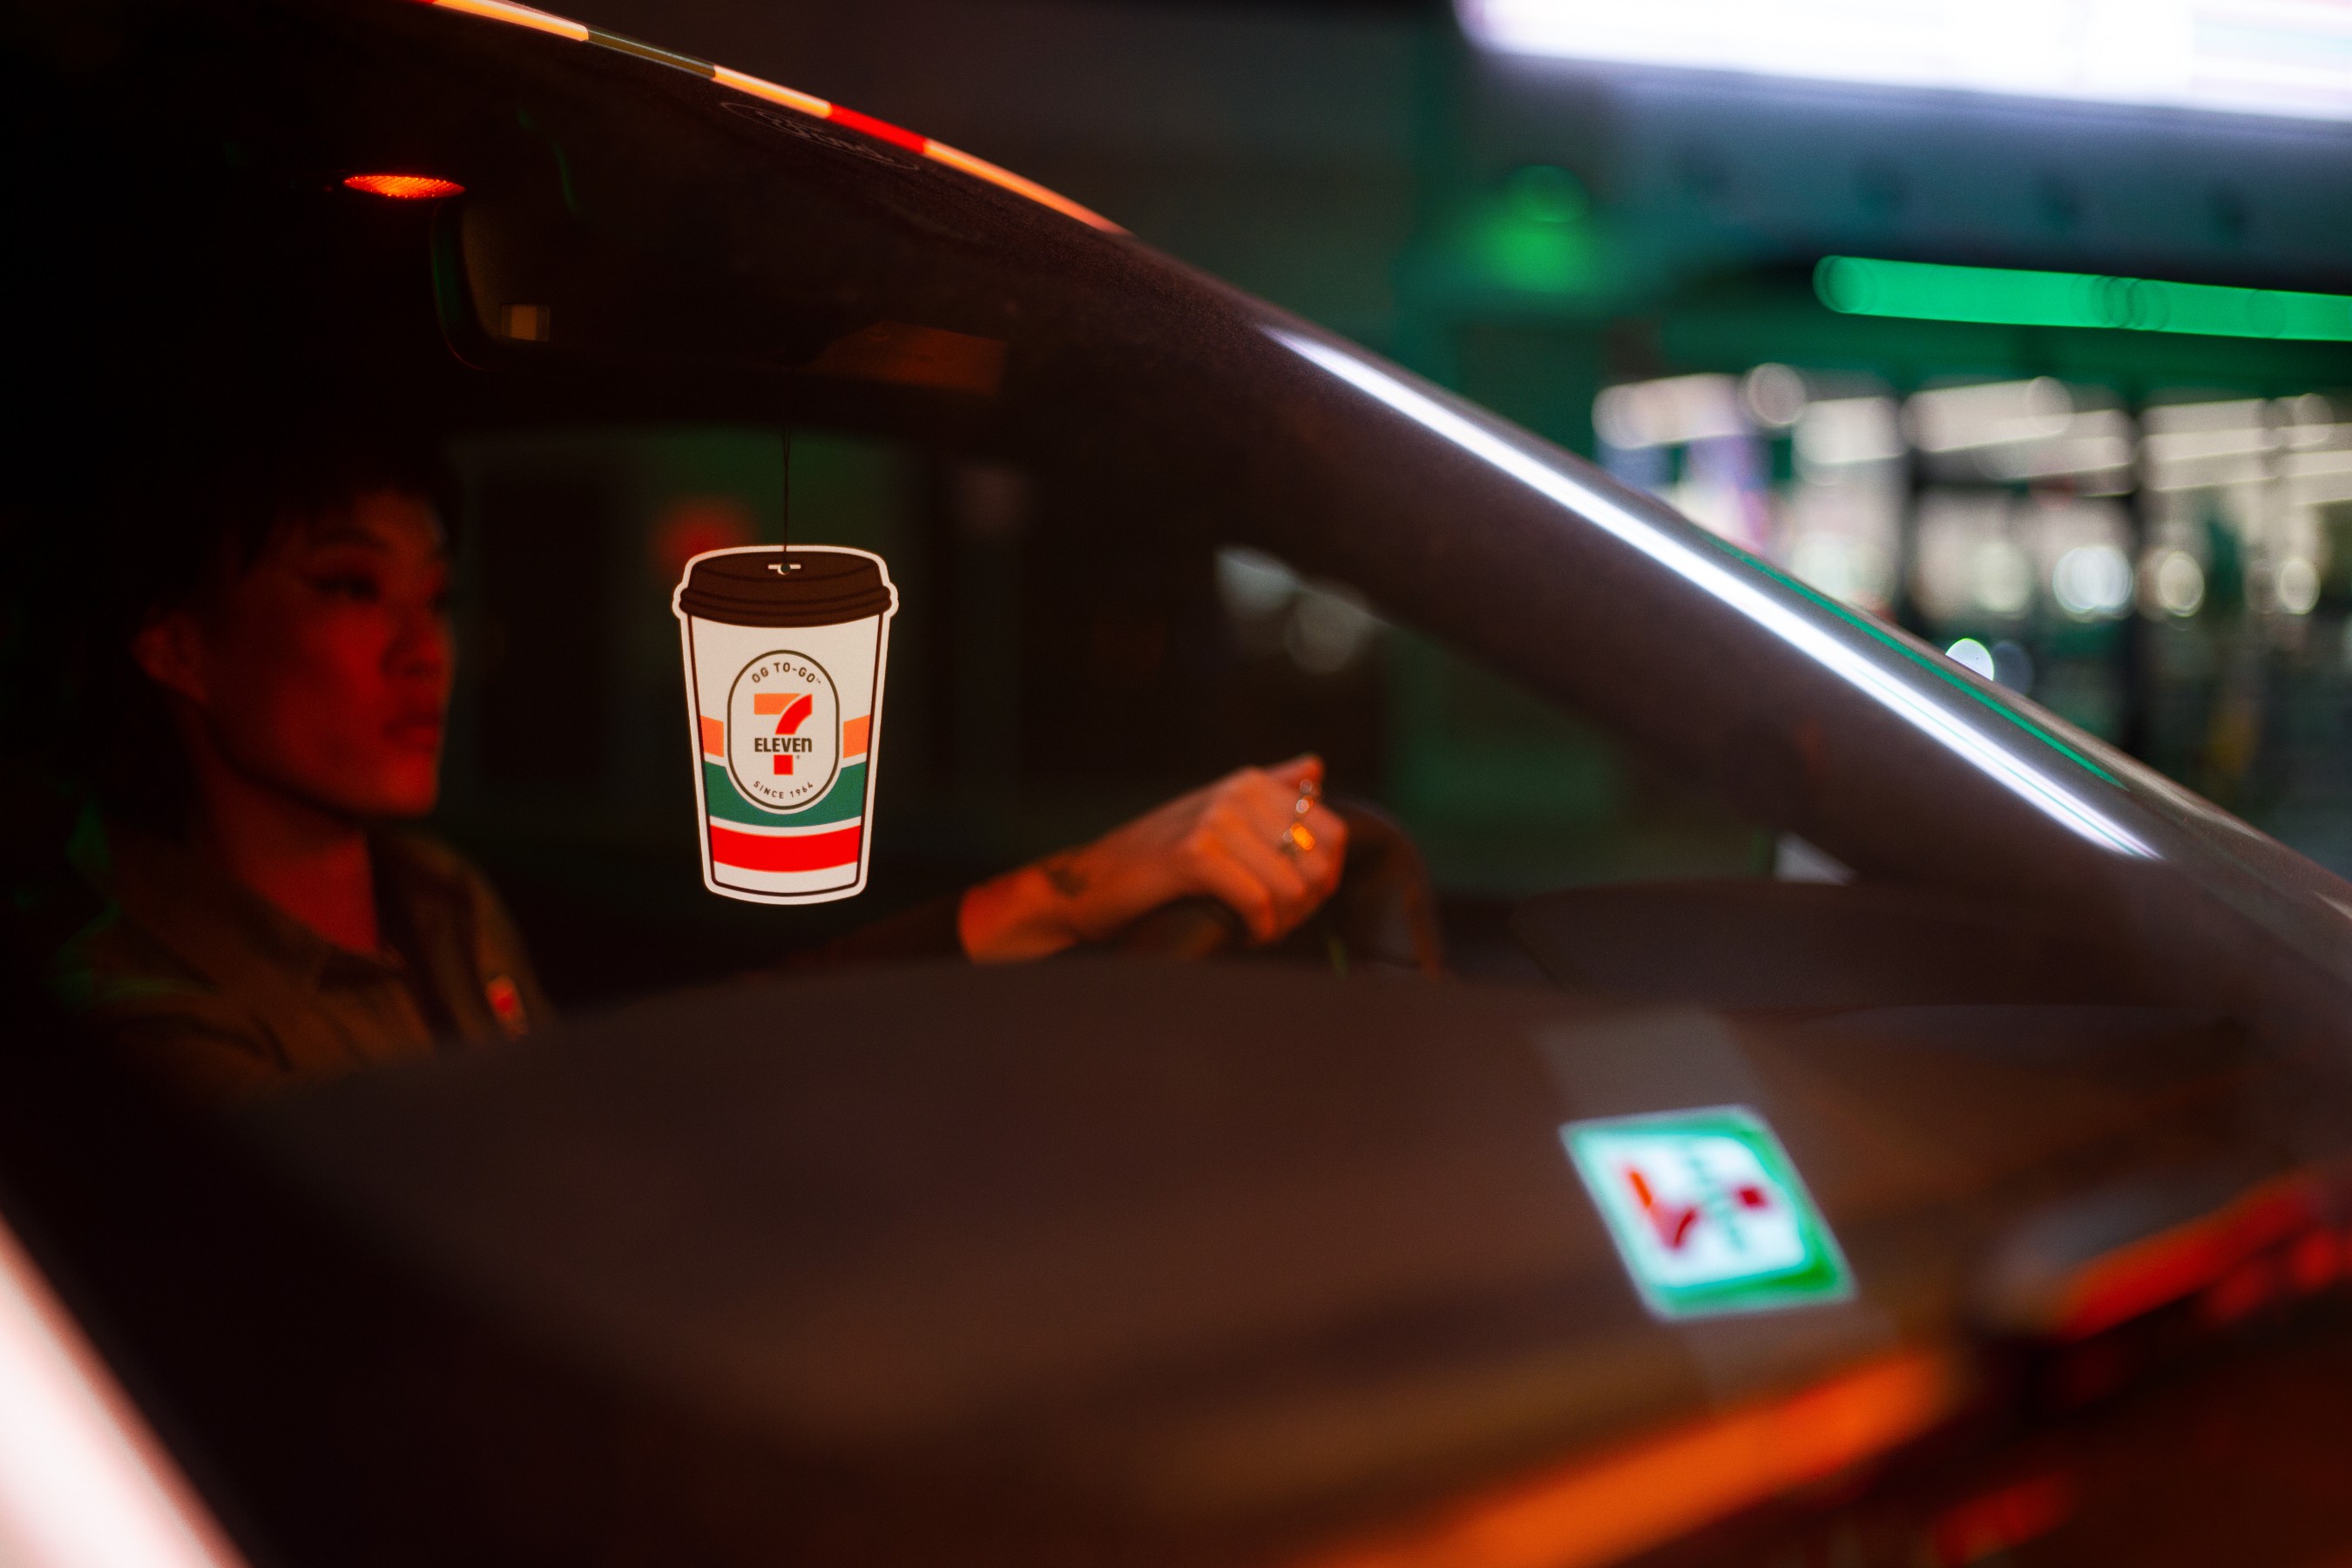 One lucky customer still has the chance to win these one-of-a-kind 7-Eleven-inspired wheels through a social media, delivery and in-store sweepstakes